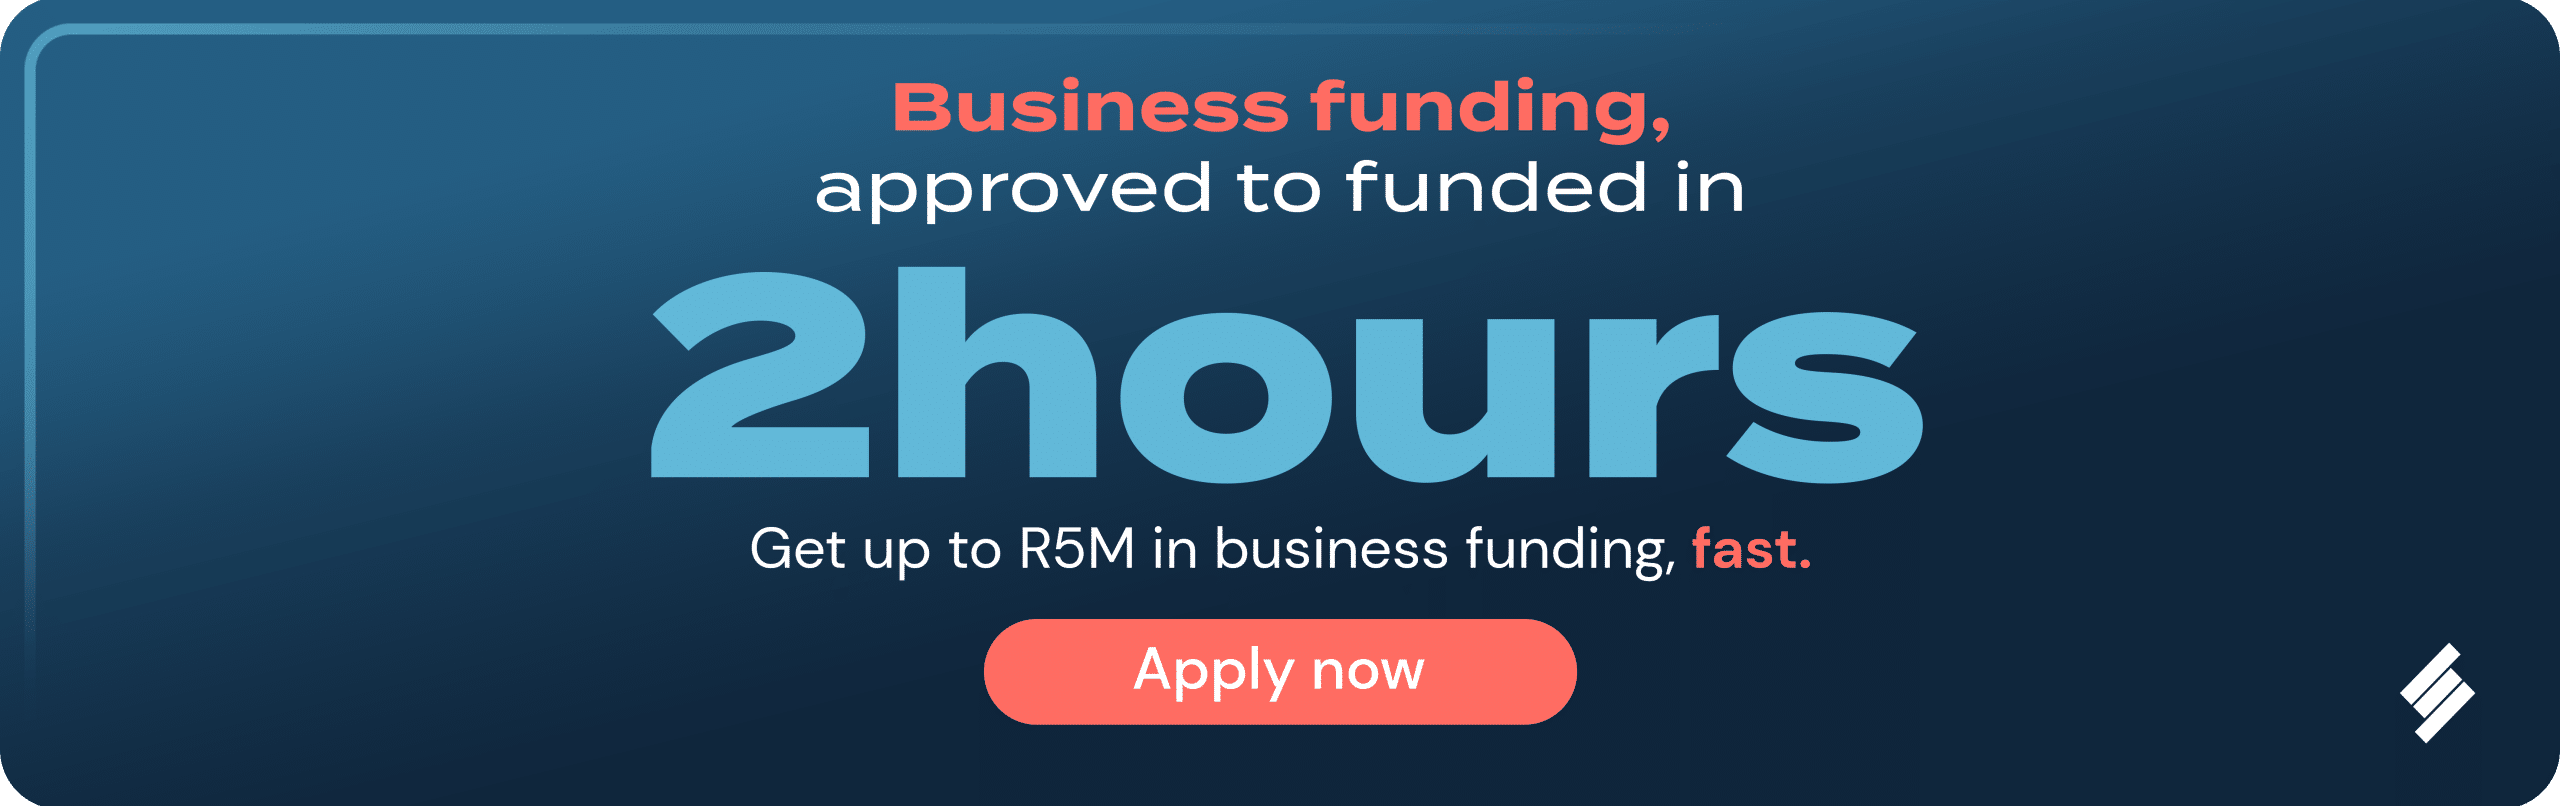 Business funding in 2 hours by Lula